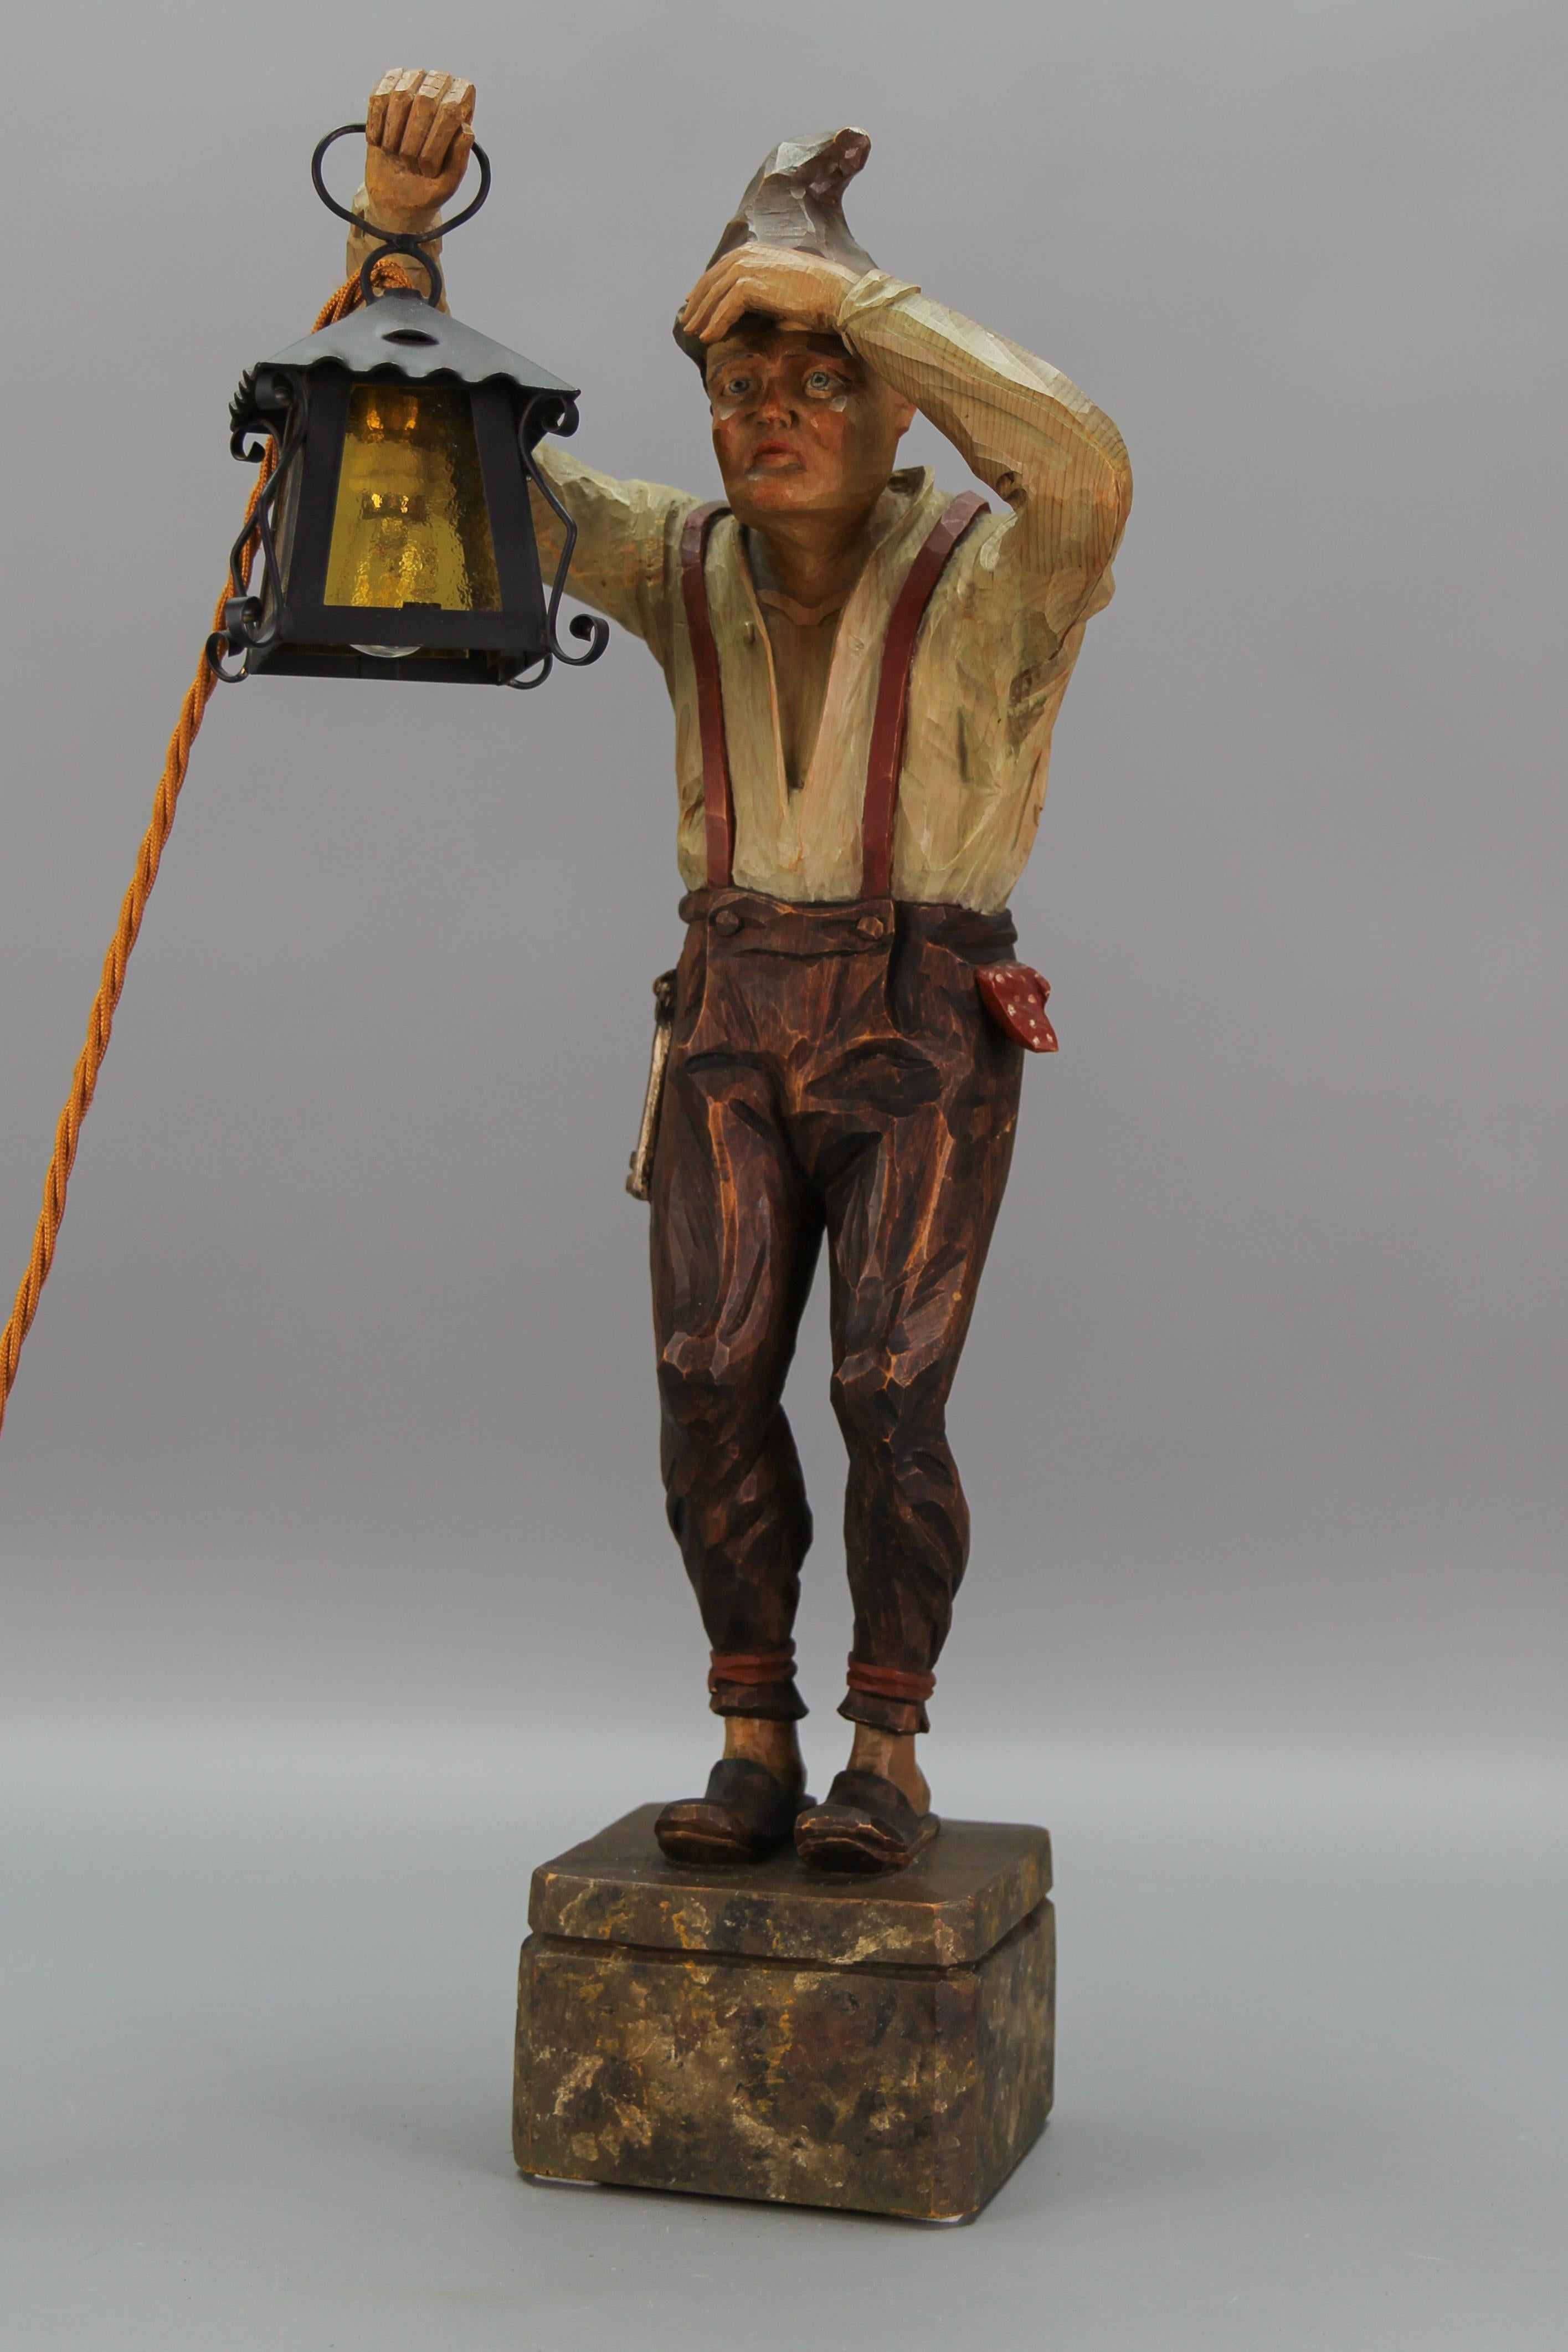 Large figural hand-carved wooden lamp, sculpture - man with a lantern, Germany, circa the 1930s
An impressive and unique sculpture of a man with a lantern in his hand. Masterfully hand-carved and hand-painted linden wood.
One socket for E14 size